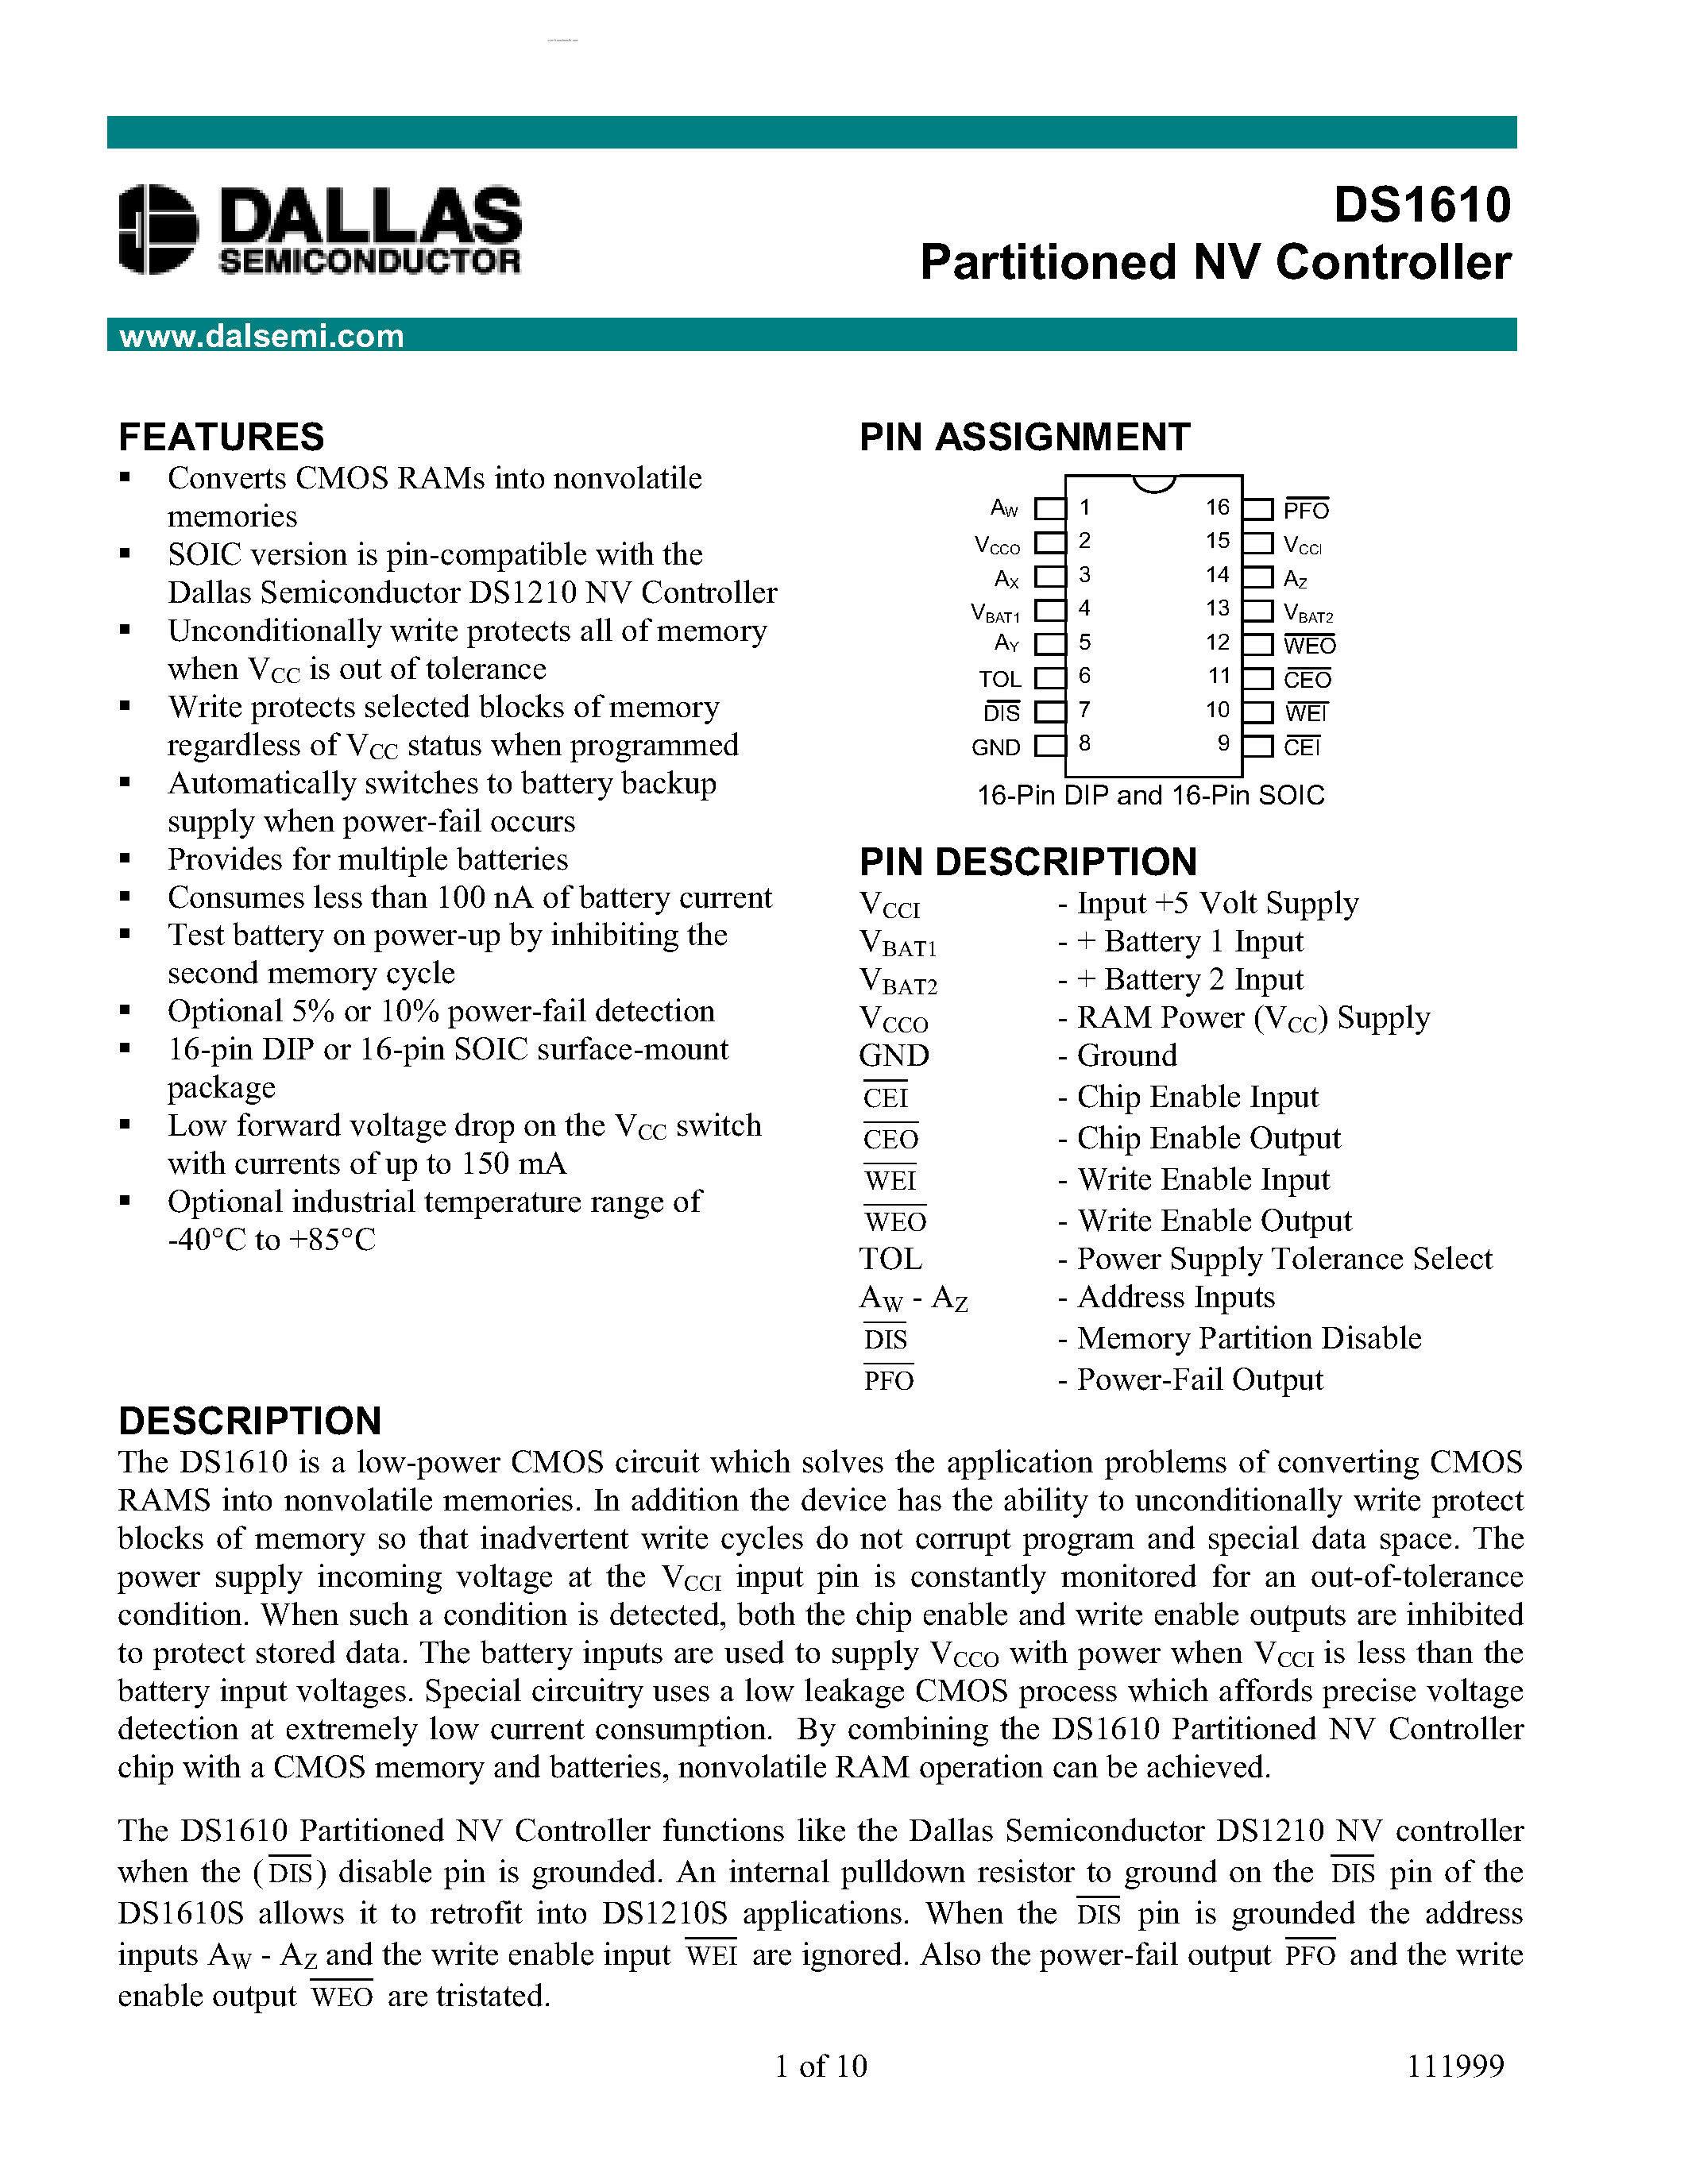 Datasheet DS1610 - Partitioned NV Controller page 1